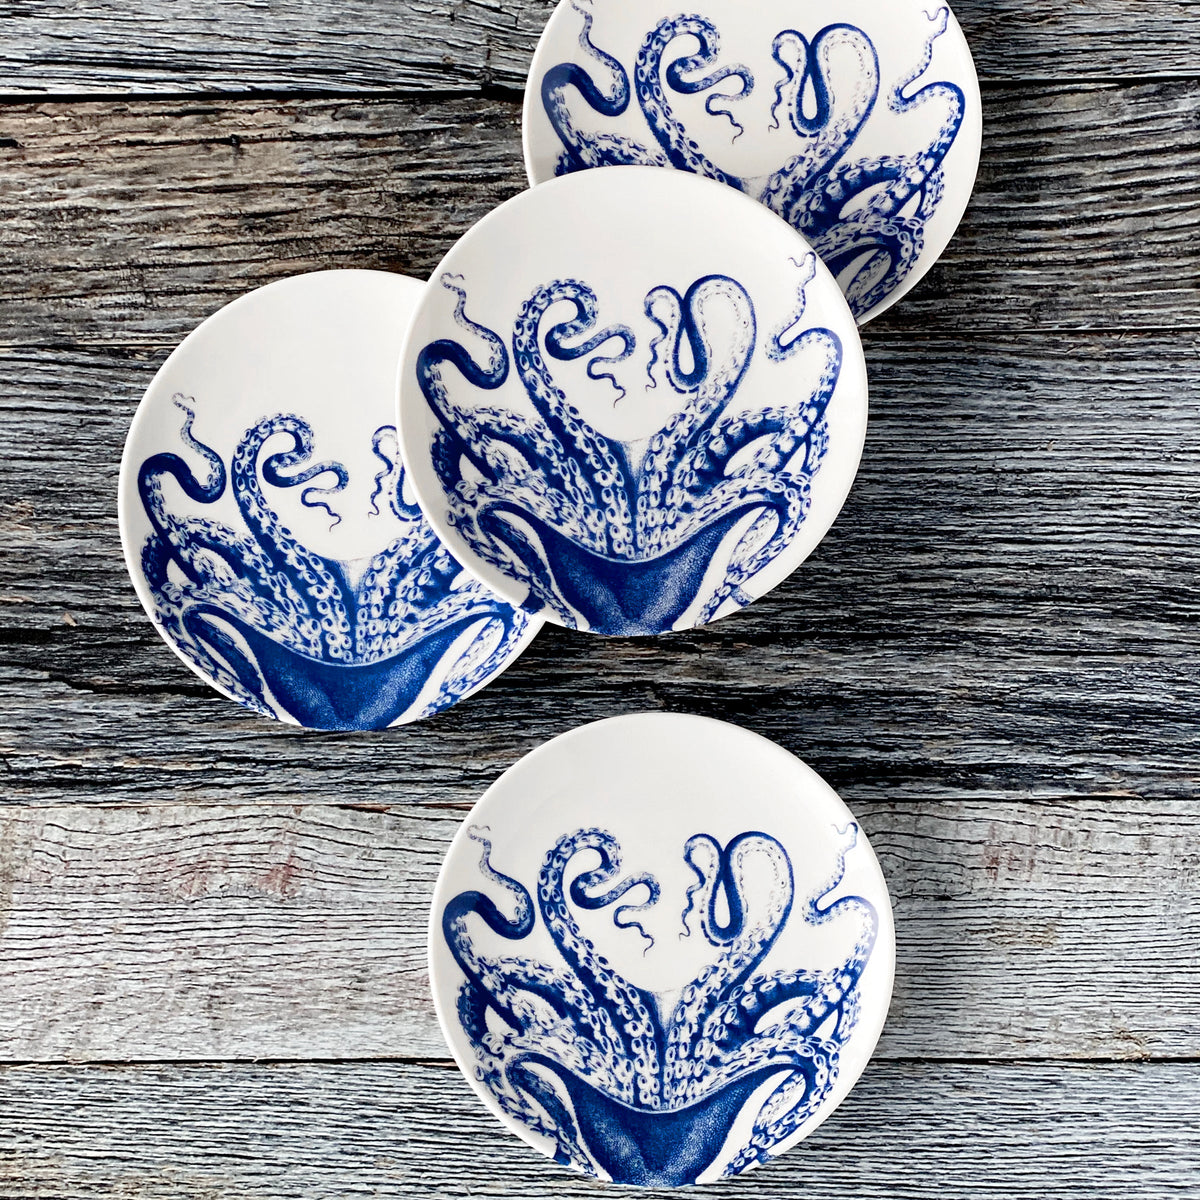 Four Lucy Canapé plates with Lucy the octopus designs on them, from Caskata Artisanal Home.